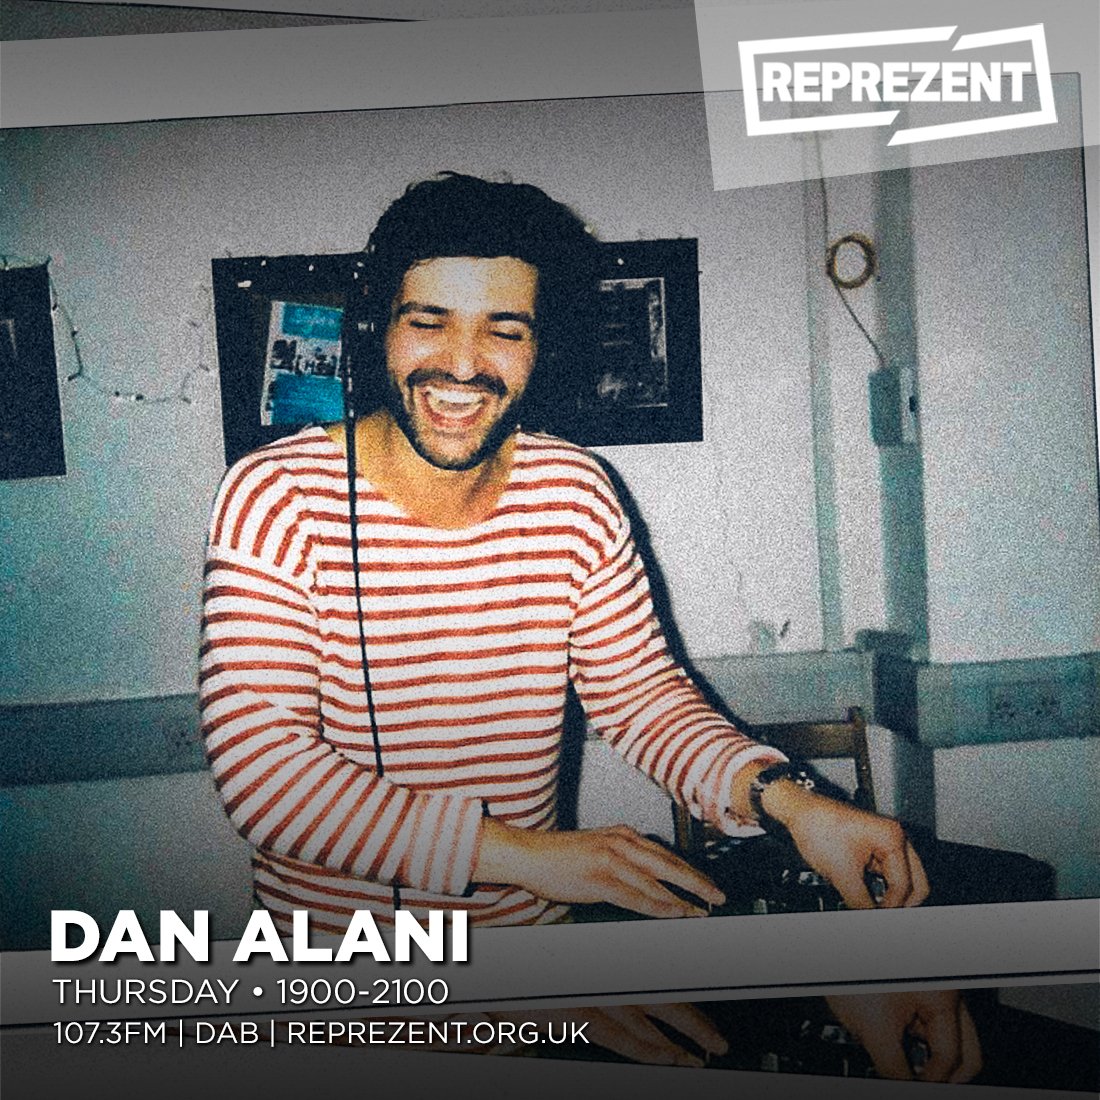 Live on @ReprezentRadio, with all this in the first hour:

@samwillsmusic 
@IndoorPets 
@Jhus 
@benjamingrafter
@Che_Lingo 
@glasspeaksband 
@boy_azooga 
@Donnynnon
#BuzzyLee (@sashaspielberg)
@Chrystal01204
@veralovesuuu

Tune In: 107.3FM London | reprezent.org.uk